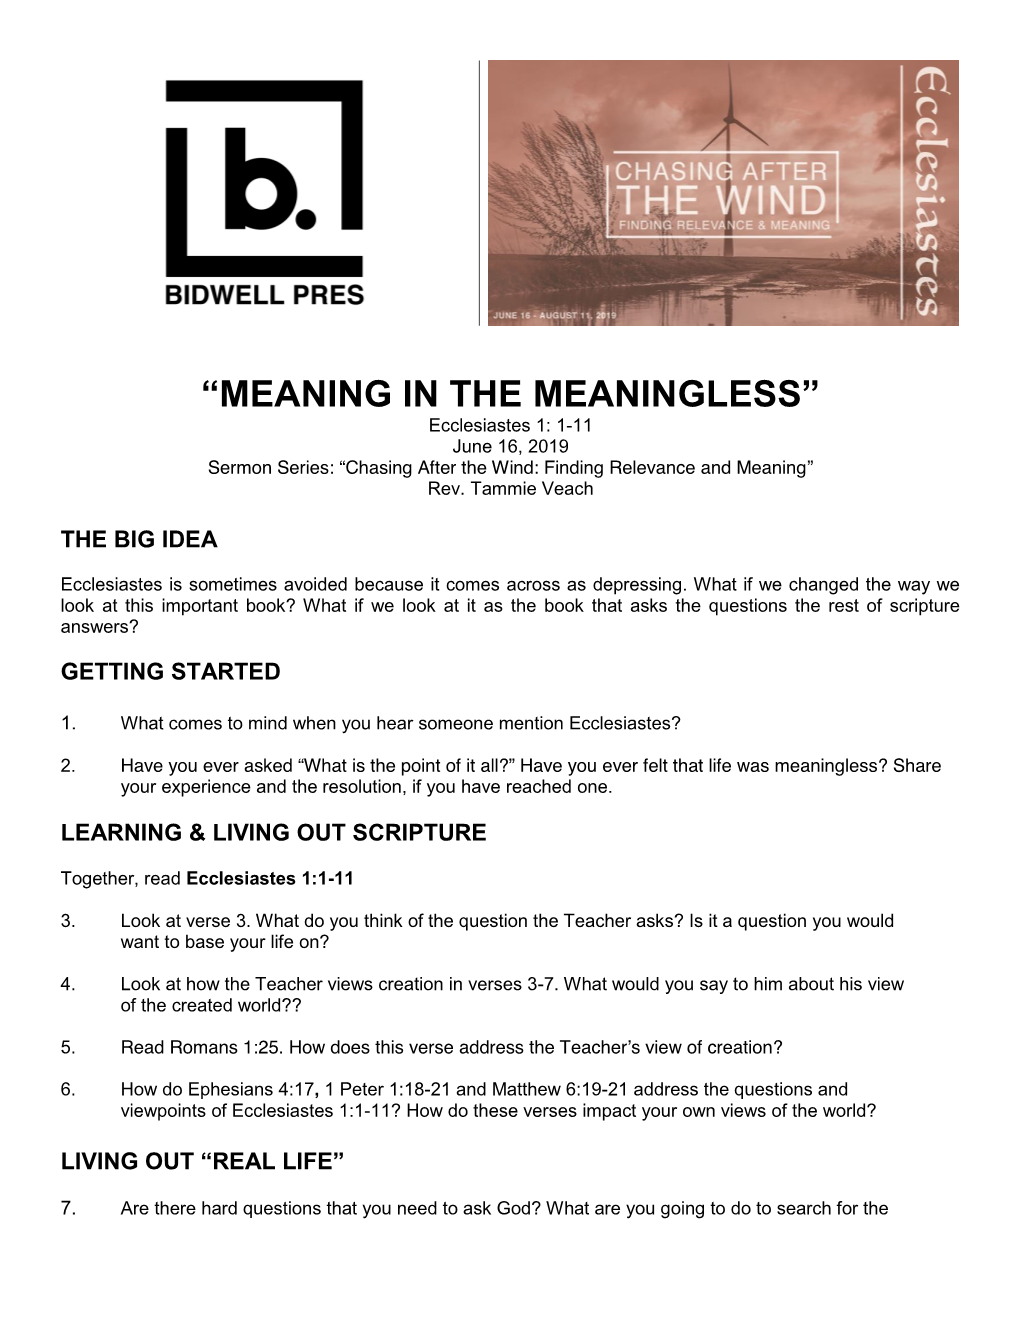 “MEANING in the MEANINGLESS” Ecclesiastes 1: 1-11 June 16, 2019 Sermon Series: “Chasing After the Wind: Finding Relevance and Meaning” Rev